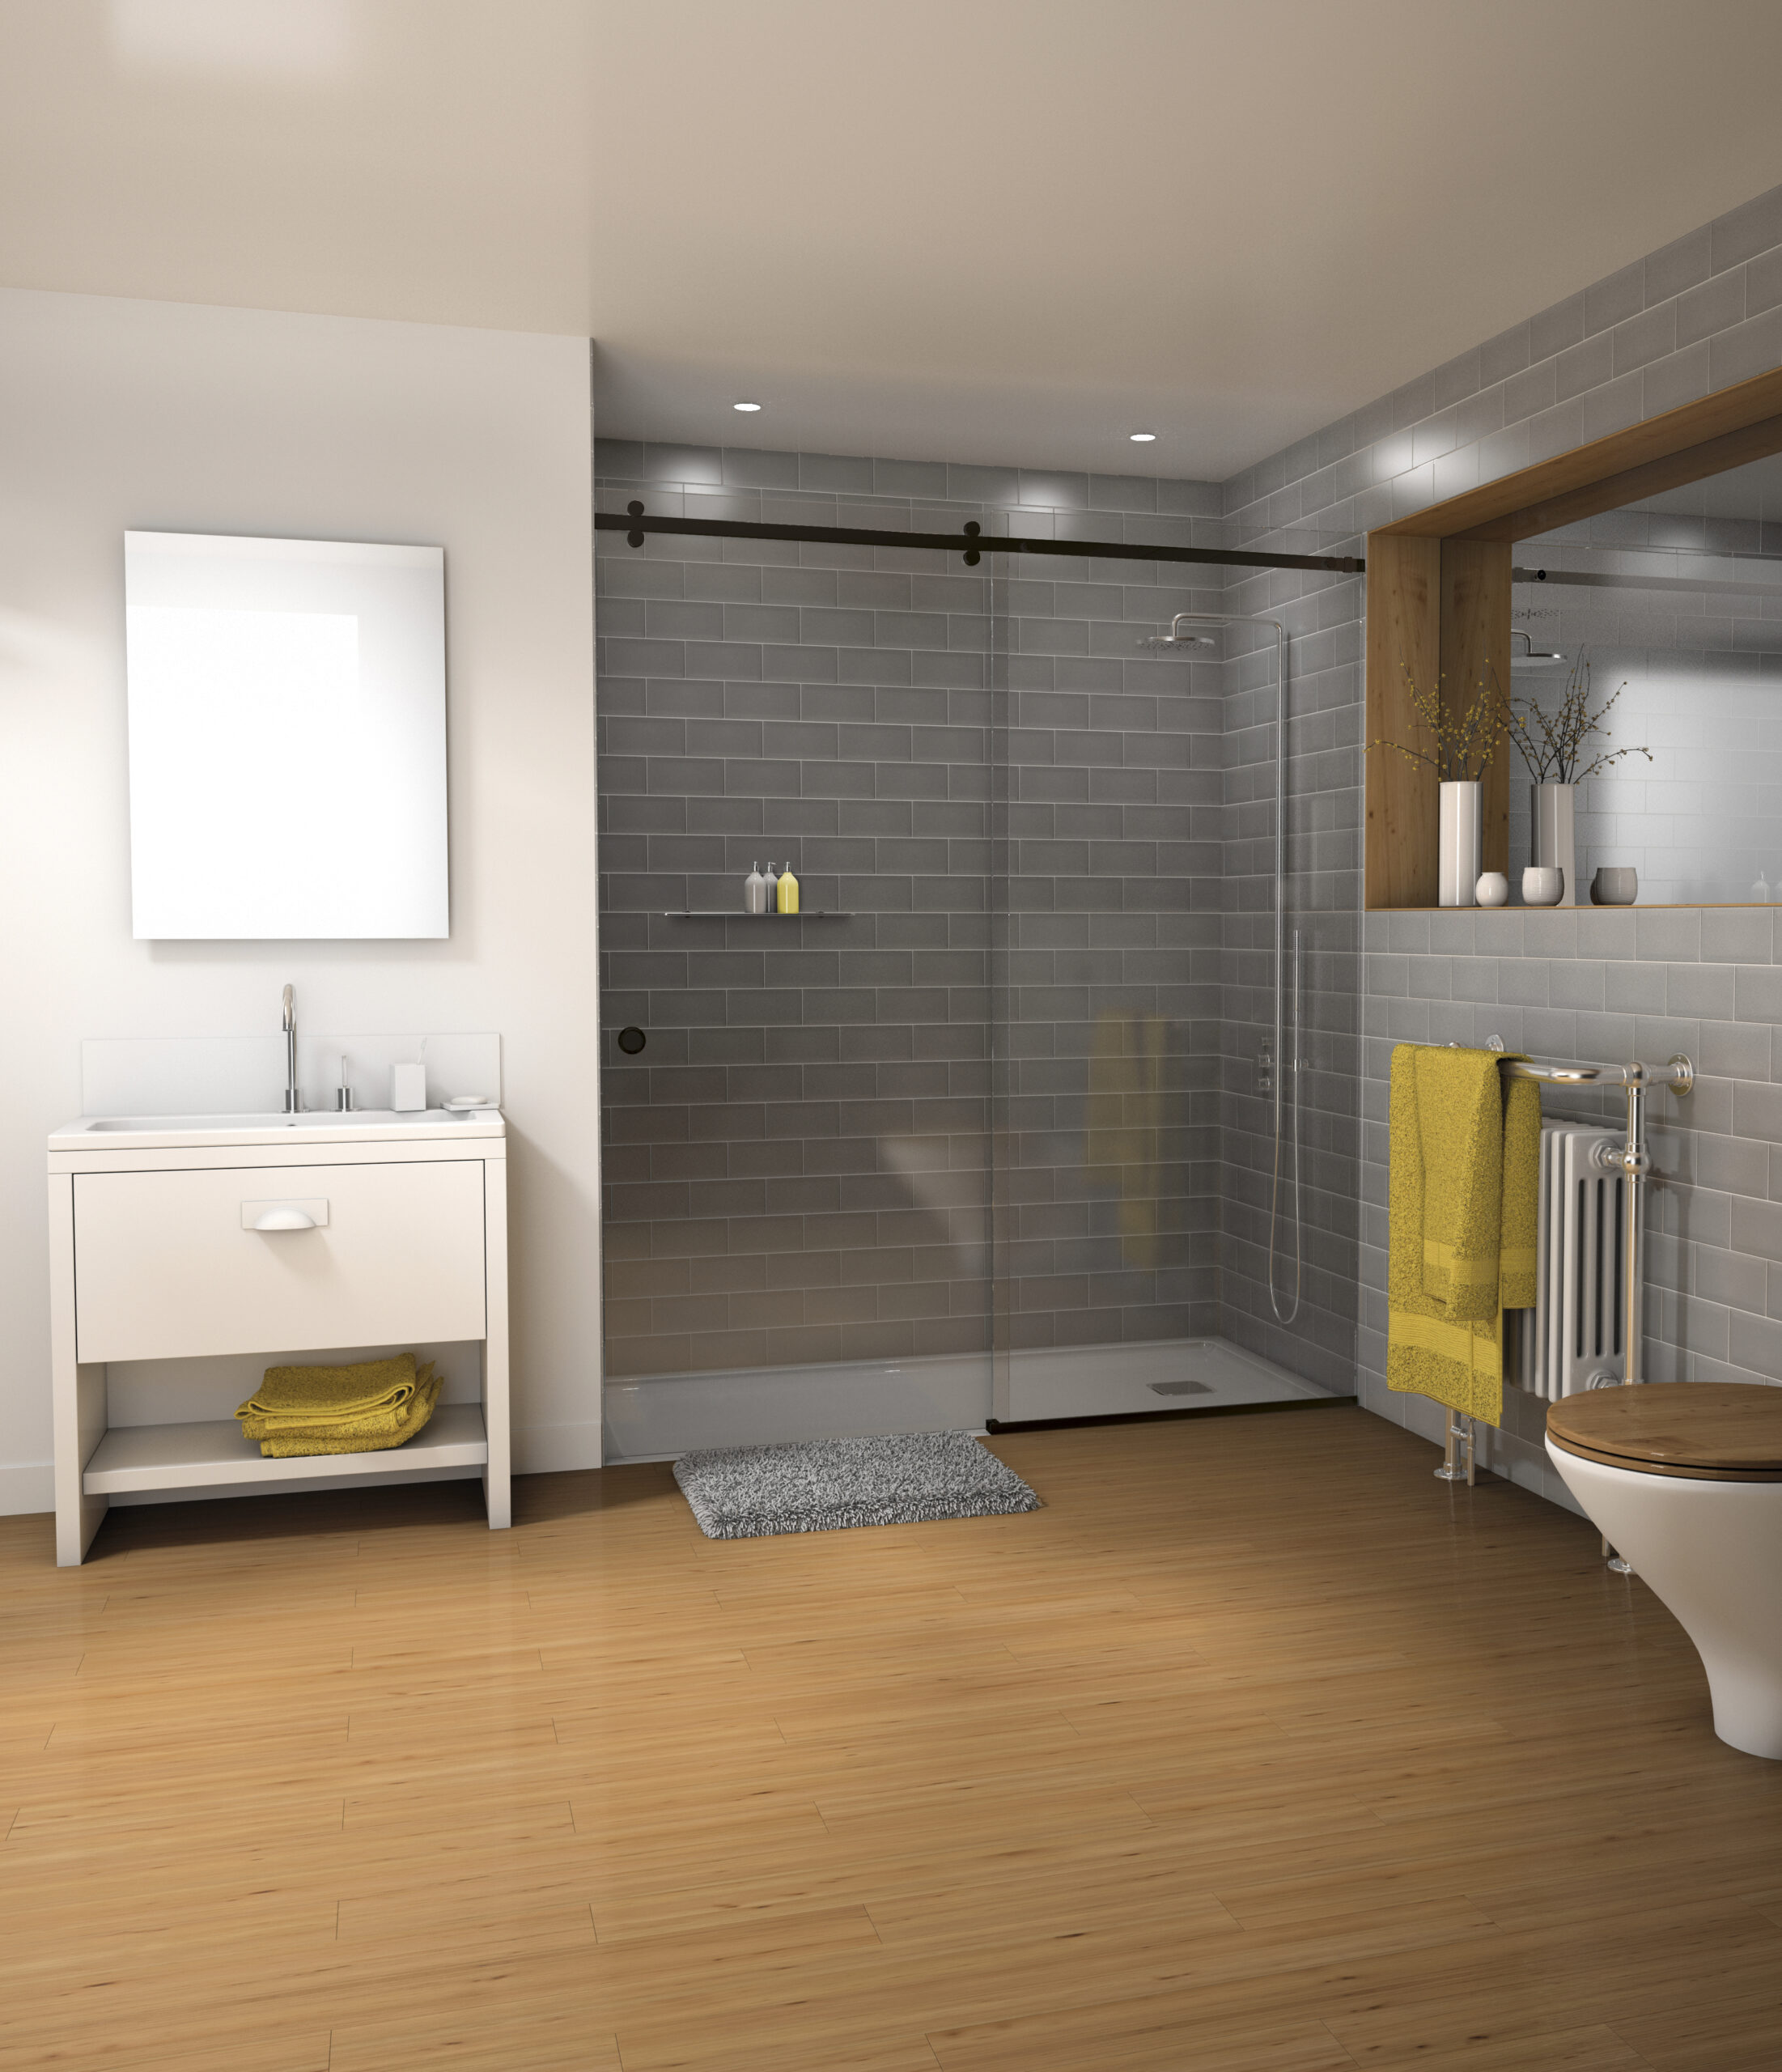 Maximising Style and Functionality: Bespoke Bathrooms for Small Spaces